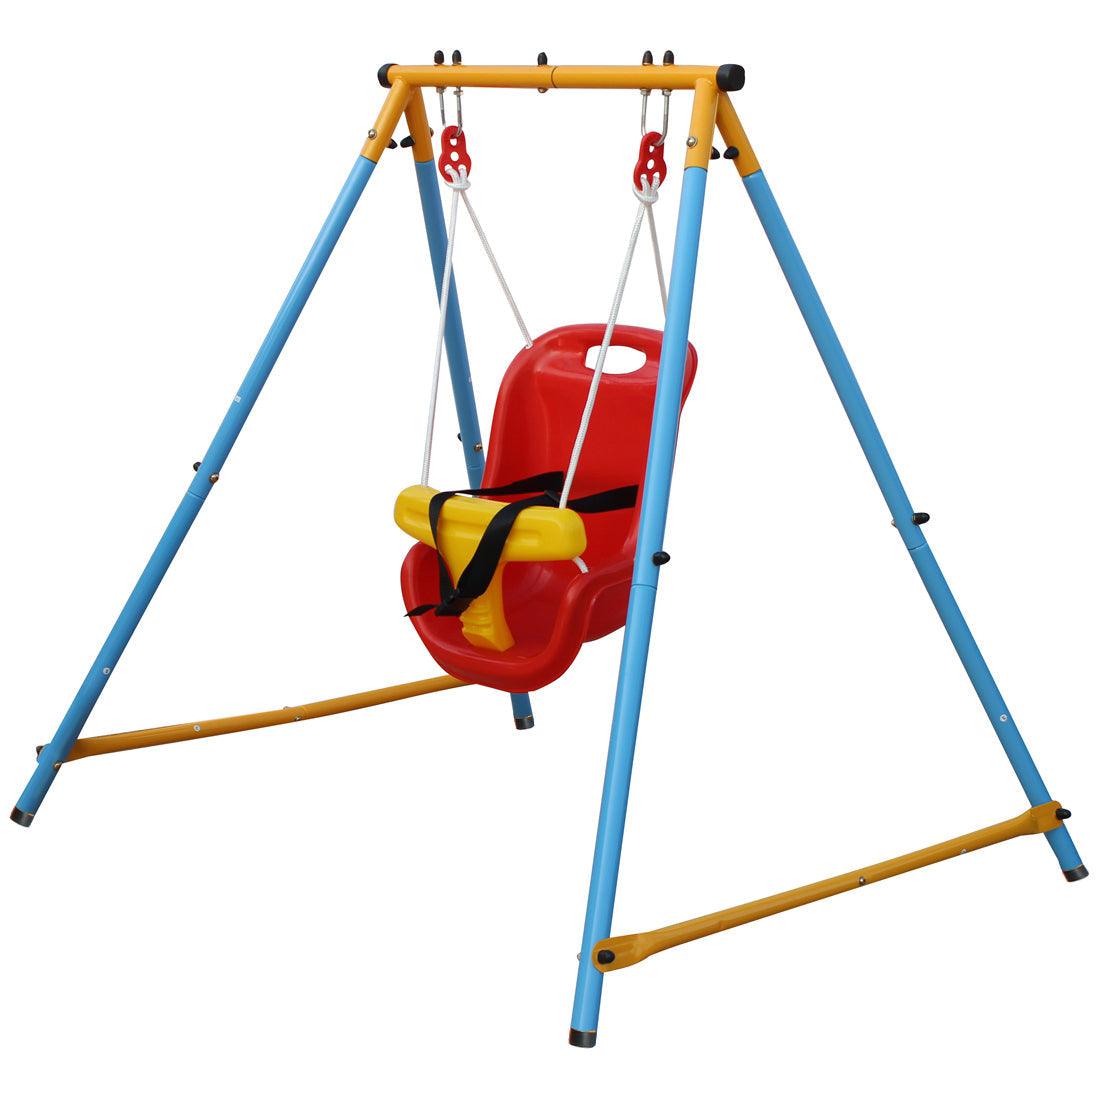 Baby Toddler Indoor/Outdoor Metal Swing Set with Safety Belt for Backyard LamCham